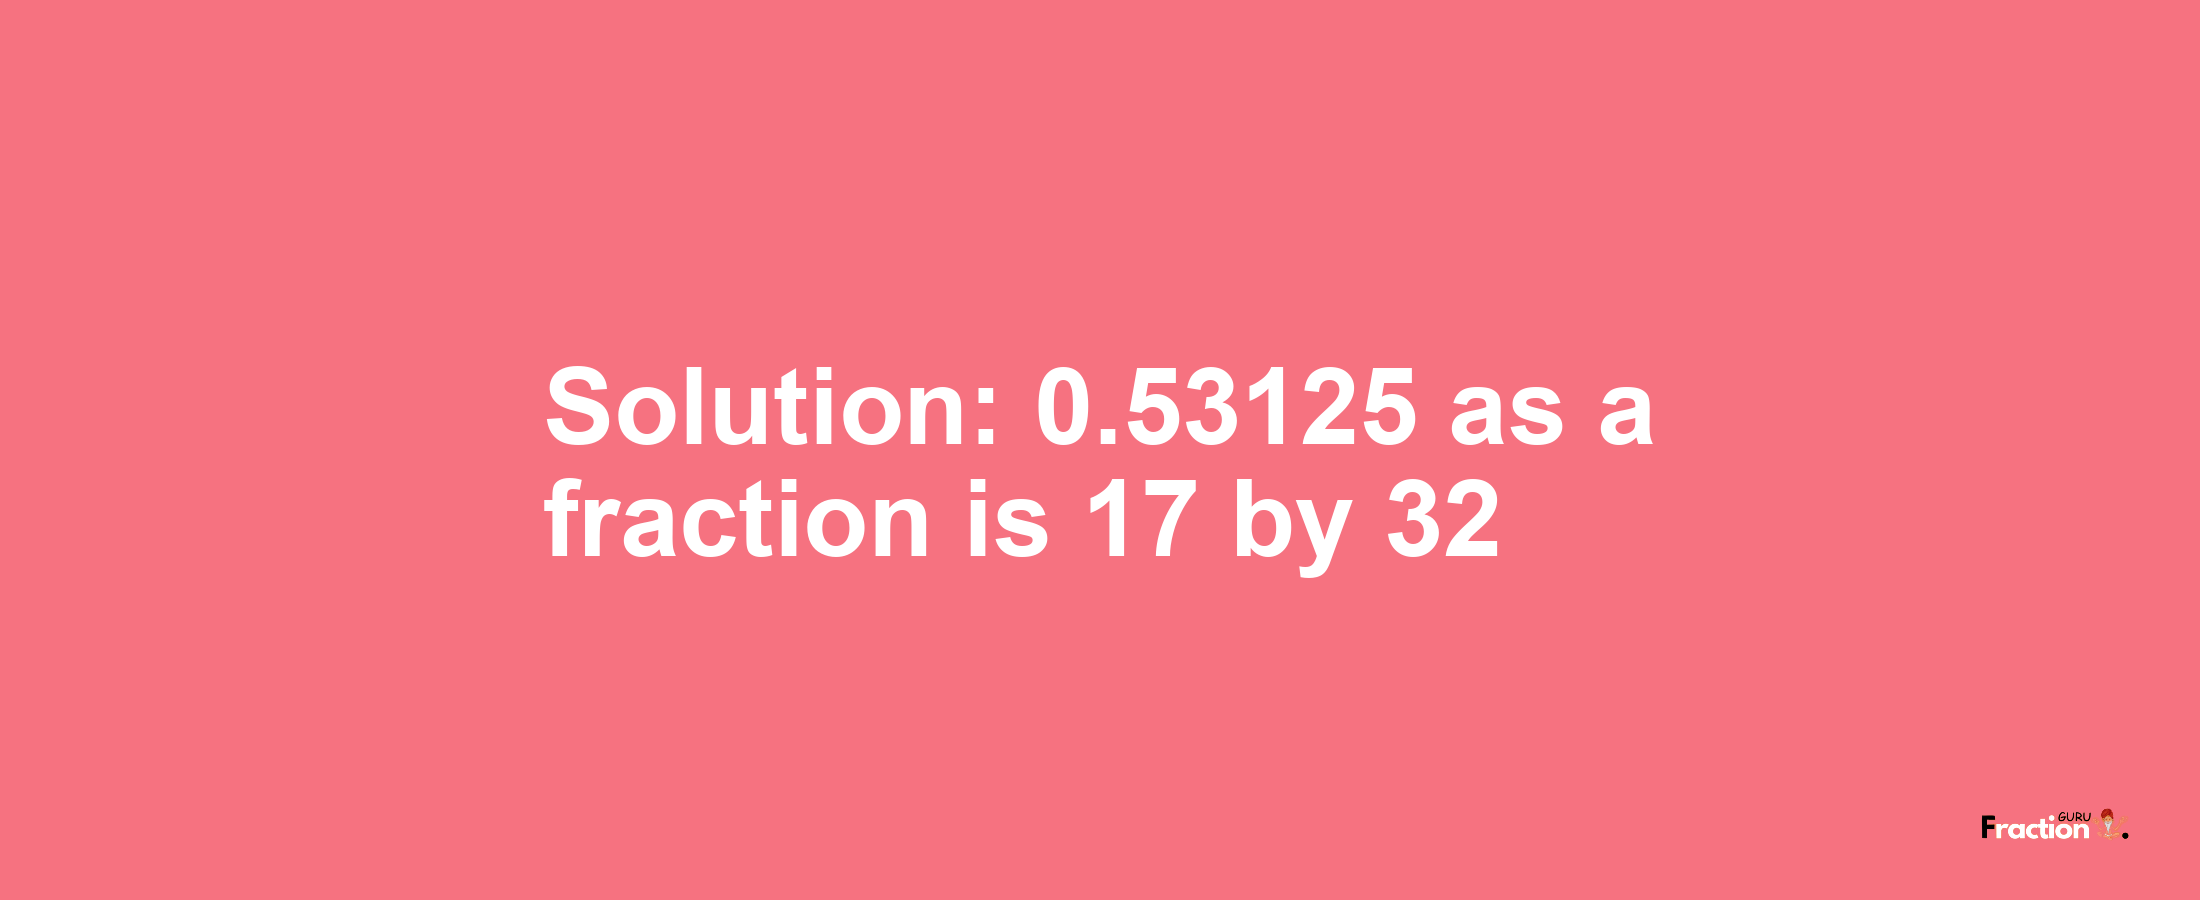 Solution:0.53125 as a fraction is 17/32